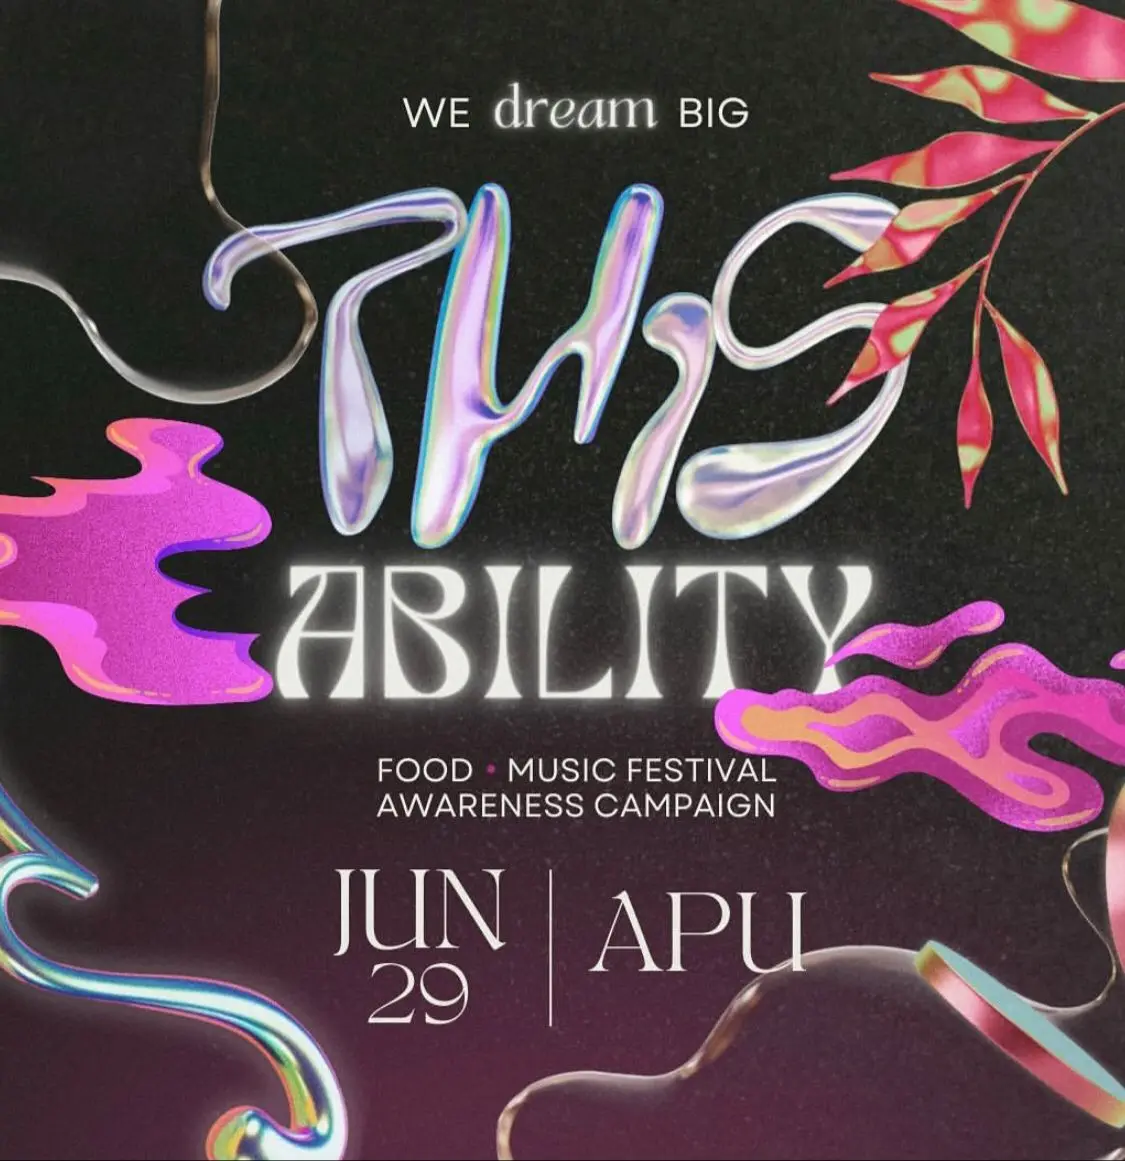 K-Rediscovery Club "This Ability” Concert!